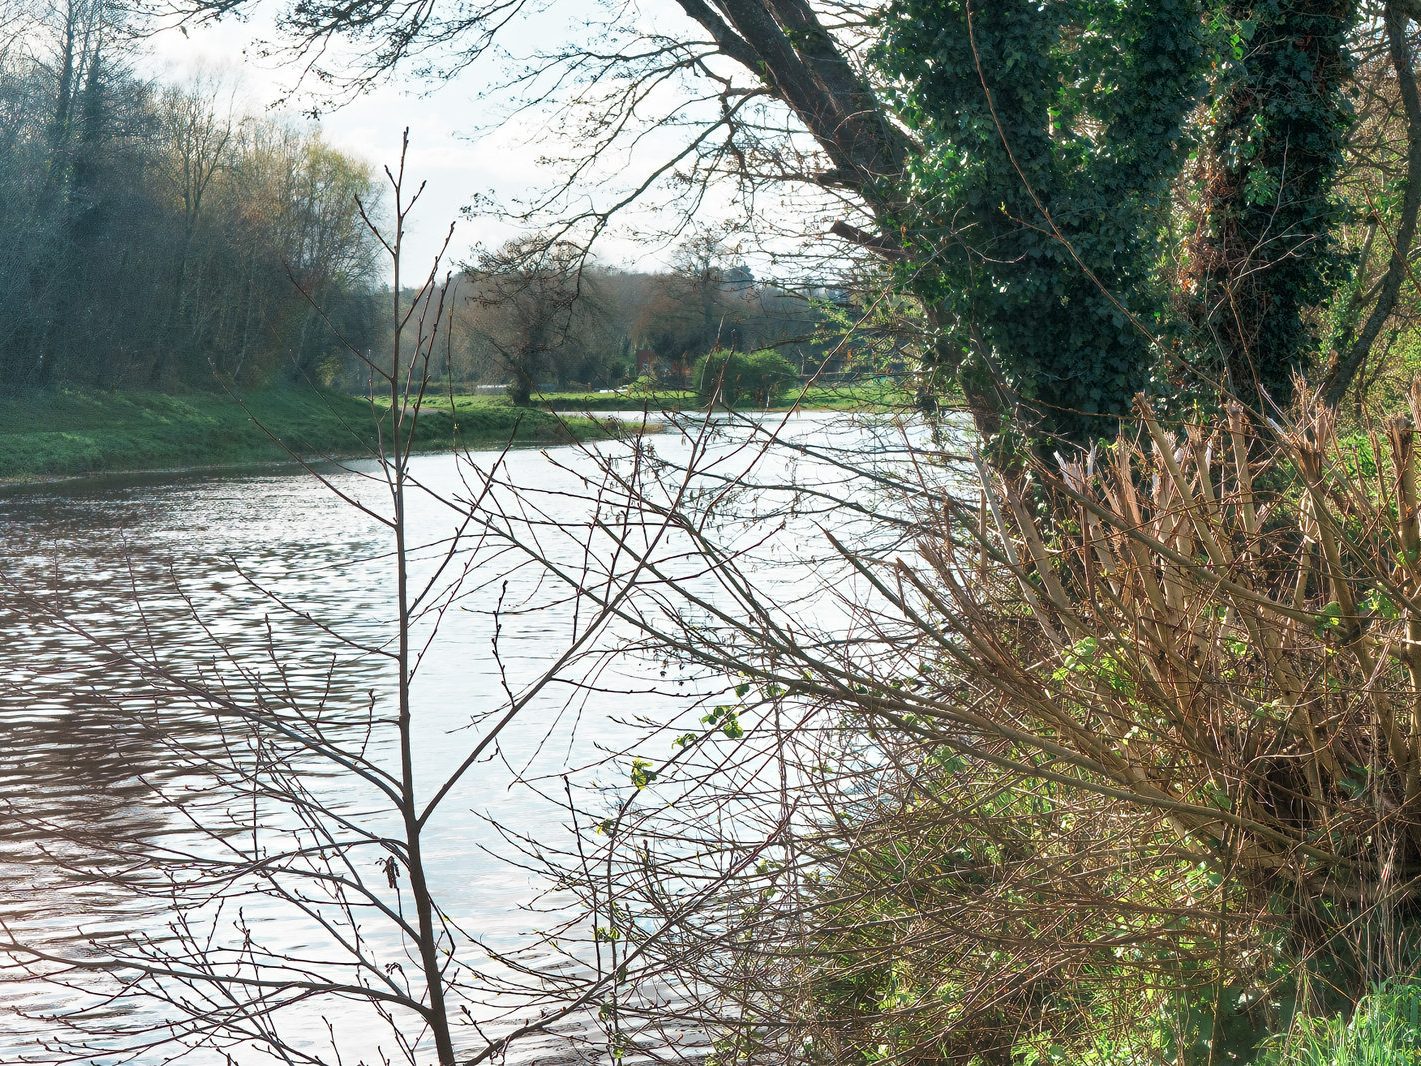 LIFFEY VALLEY PARK AT CHAPELIZOD ON THE NORTH SIDE OF THE RIVER [ACROSS THE ROAD FROM THE ENTRANCE TO PHOENIX PARK]-223355-1